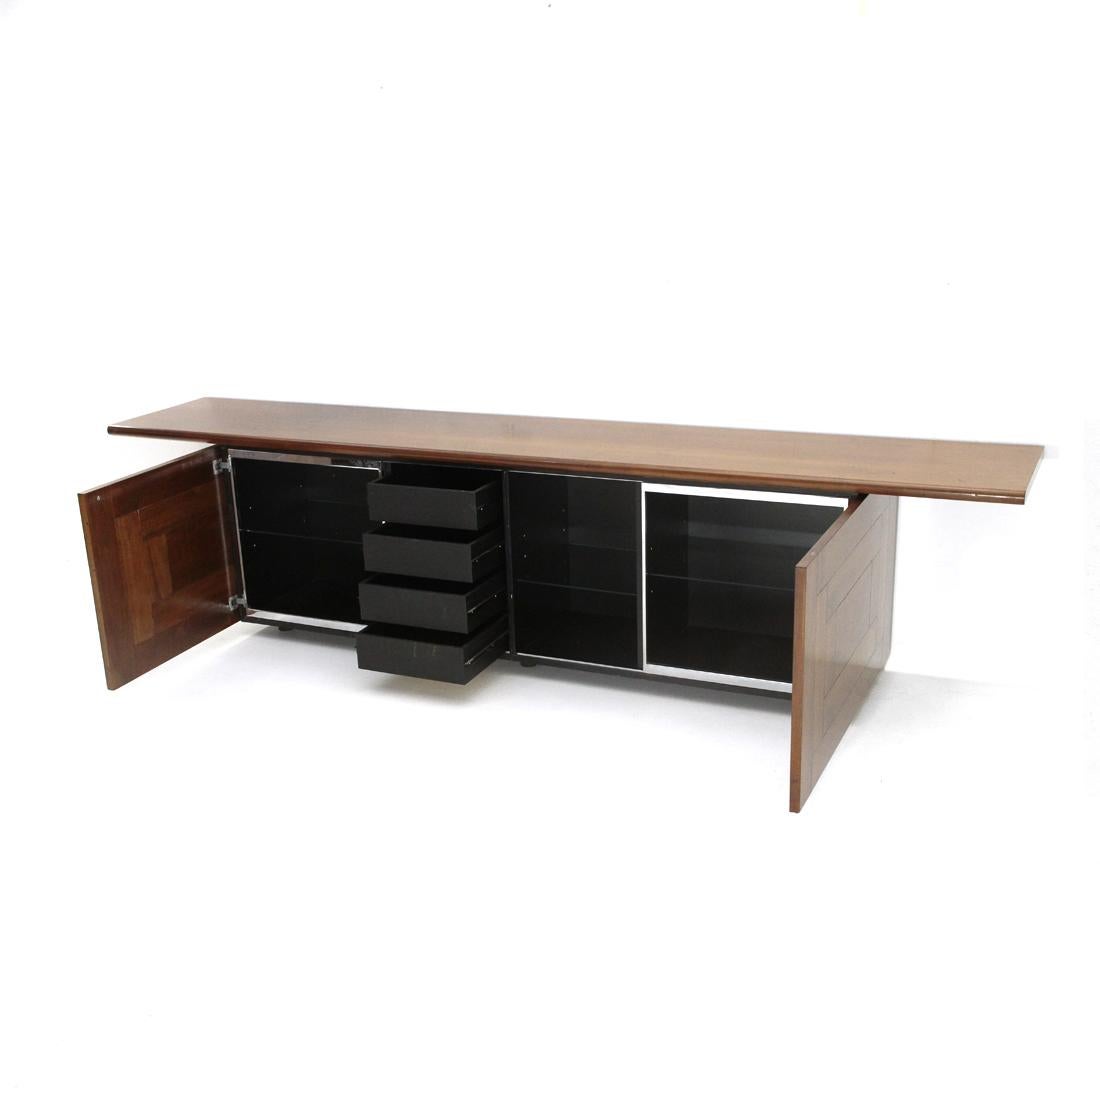 Wood Two-Door “Sheraton” Sideboard by Giotto Stoppino and Lodovico Acerbis for Acerbi